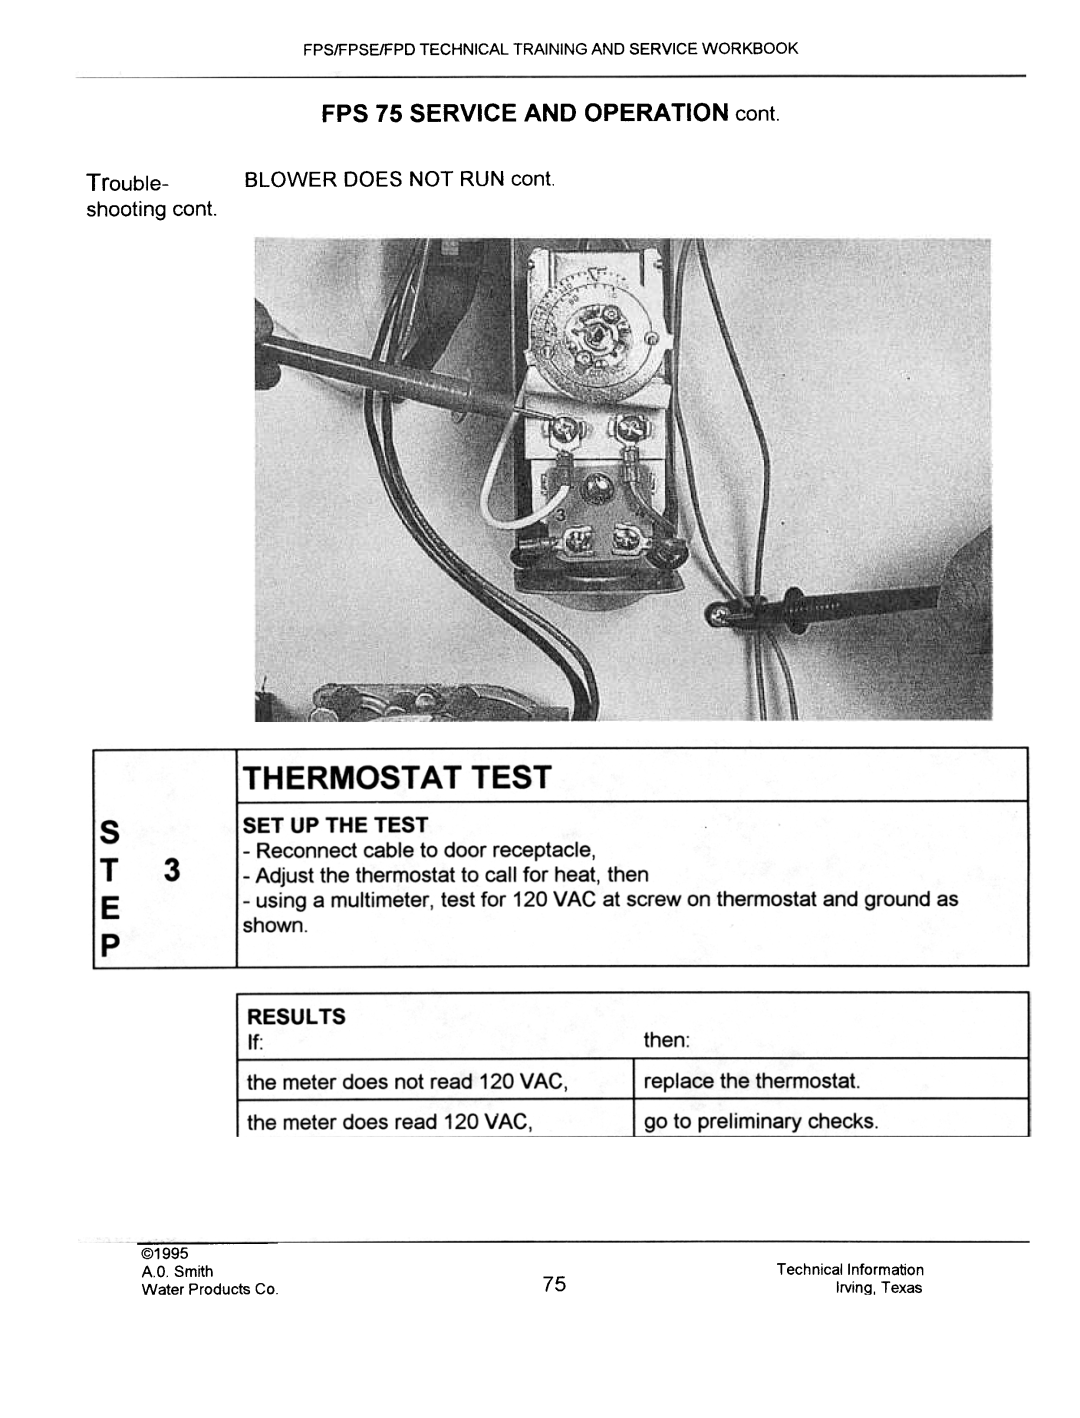 A.O. Smith FPSE50, fps50 RESULTS If, Fps/Fpse/Fpd Technical Training And Service Workbook, @1995, Technical Information 